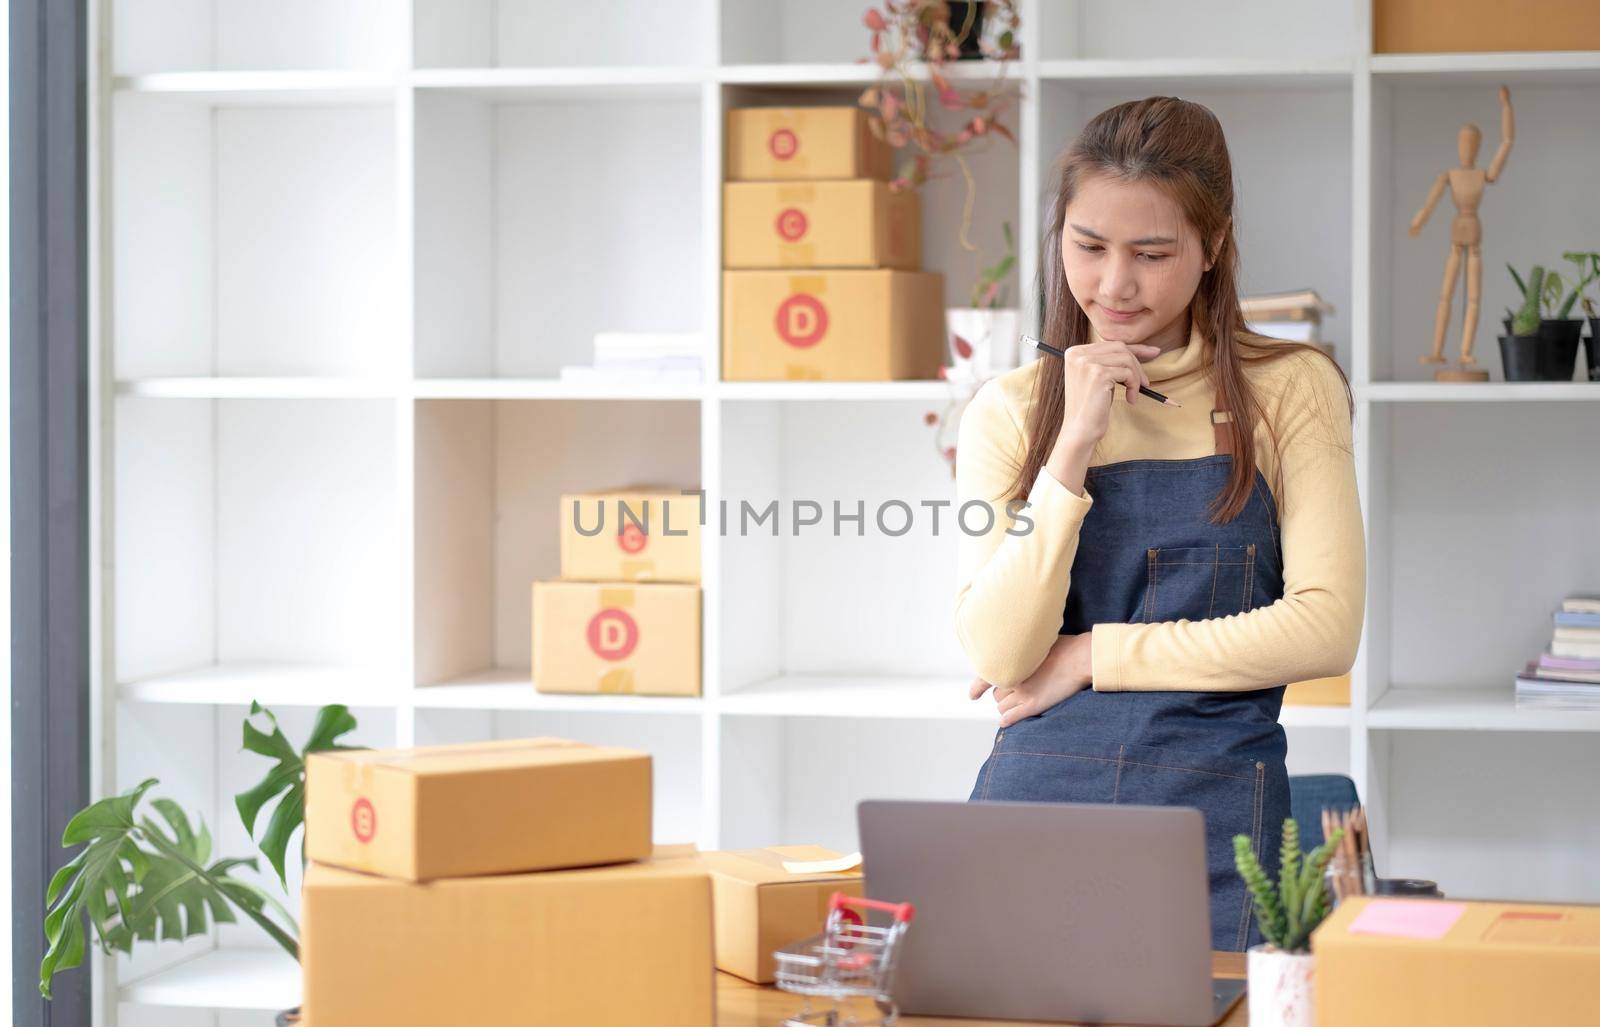 Startup small business entrepreneur or freelance Asian woman using a laptop with box, Young success Asian woman with her hand lift up, online marketing packaging box and delivery, SME concept..